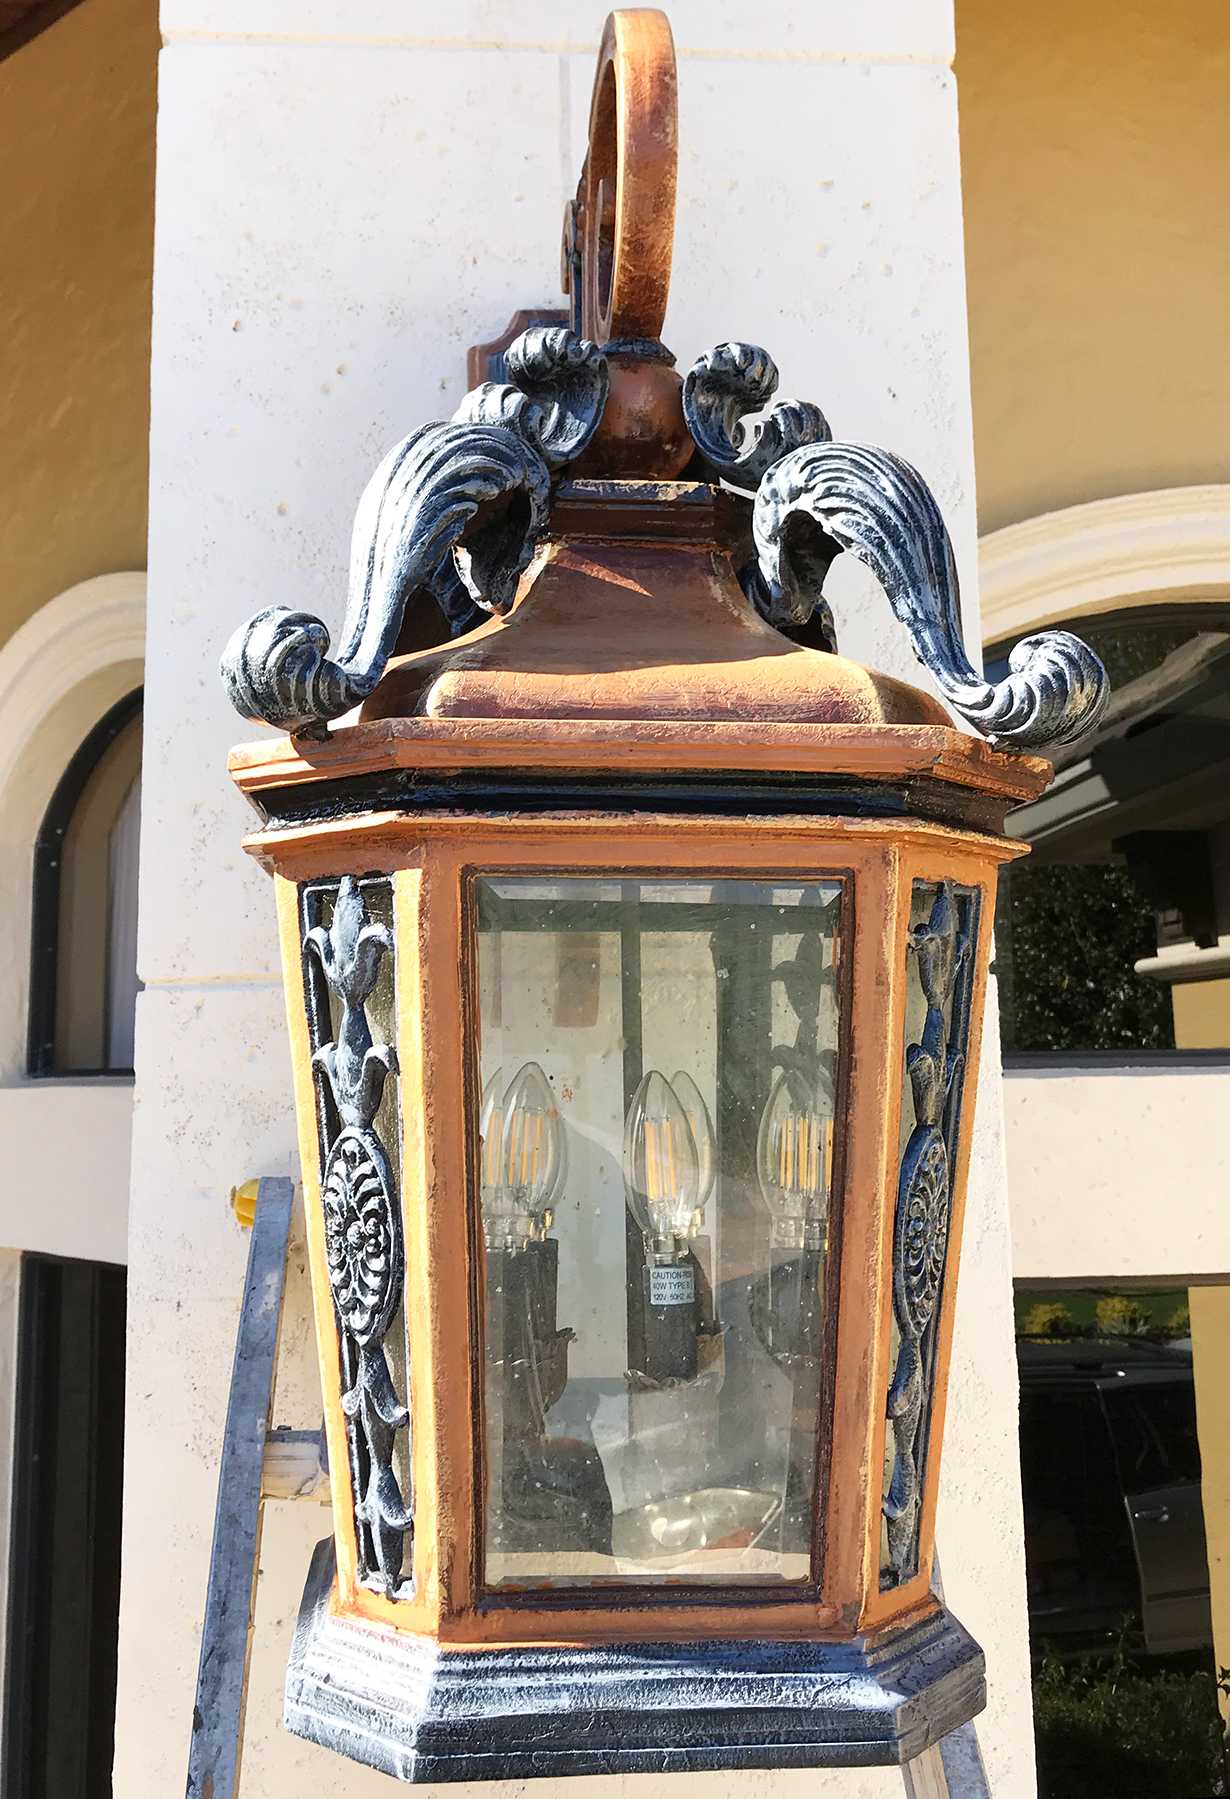 Main front lantern restored from weather damage